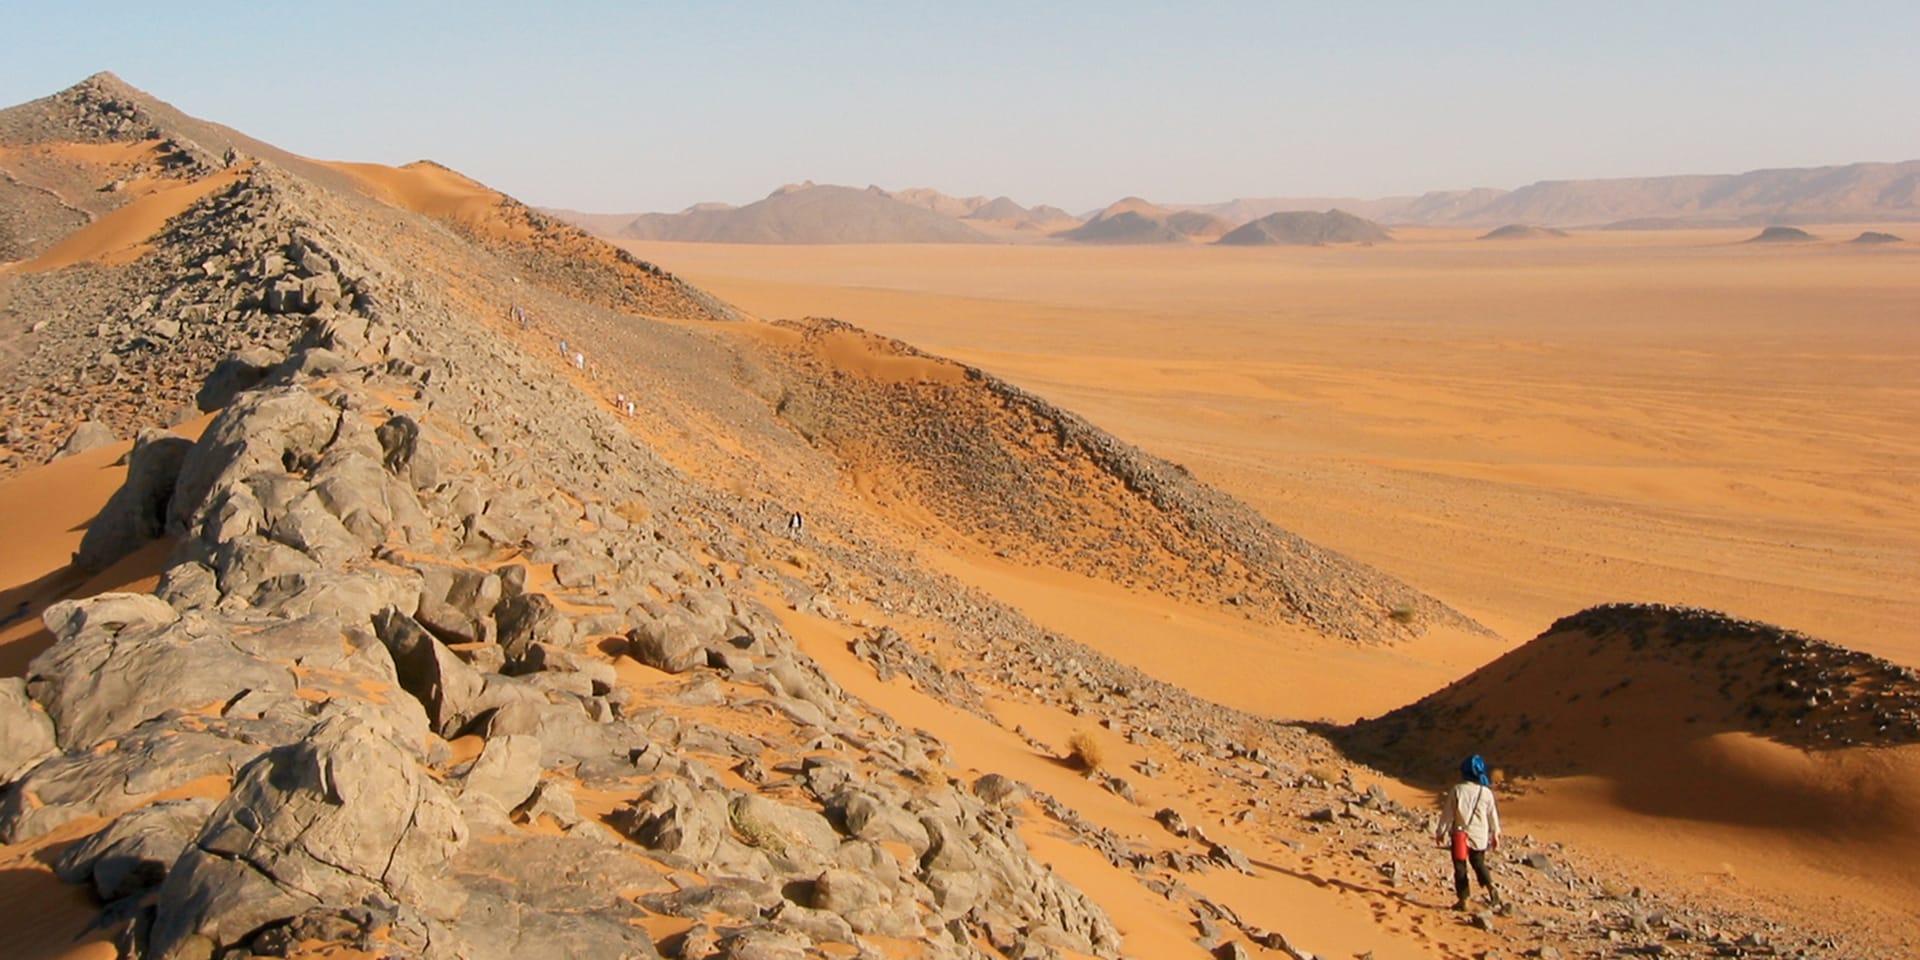 Image of a rocky hill in the desert with a person walking along its base. In the distance are several other large hills.